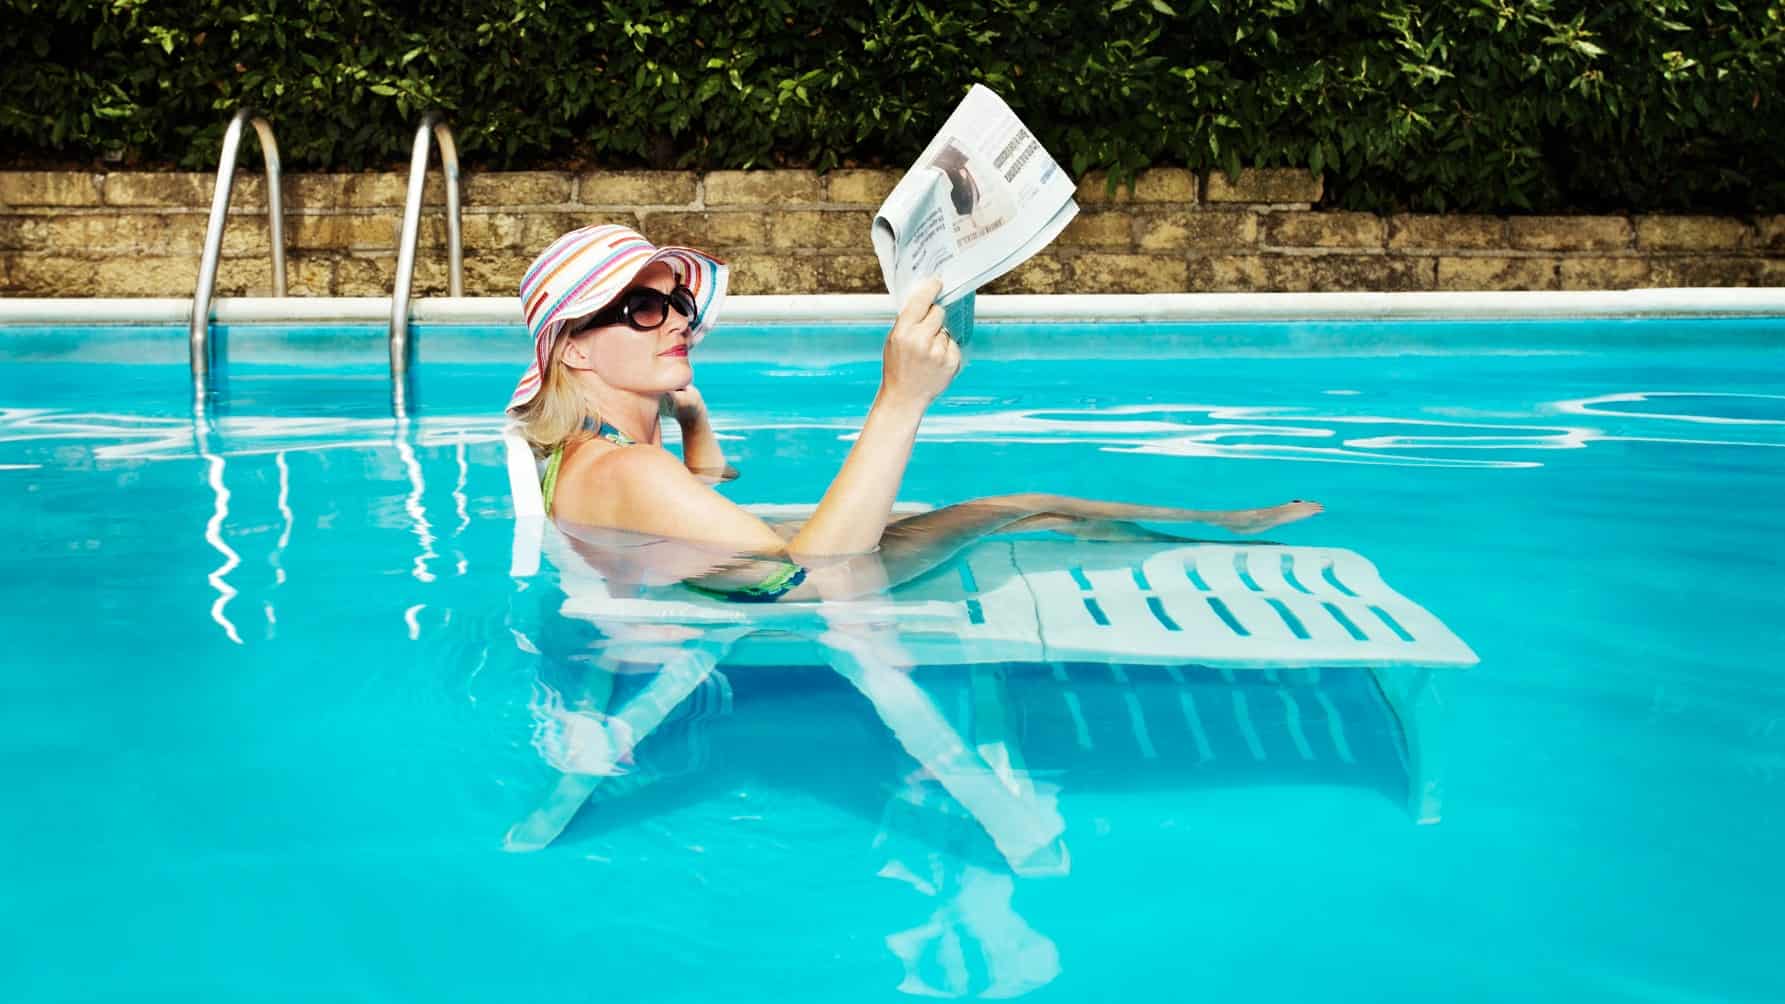 a woman wearing a hat, sunglasses and a bathing suit reads the newspaper while sitting on a lounging chair that's placed in a pool in a relaxing setting.